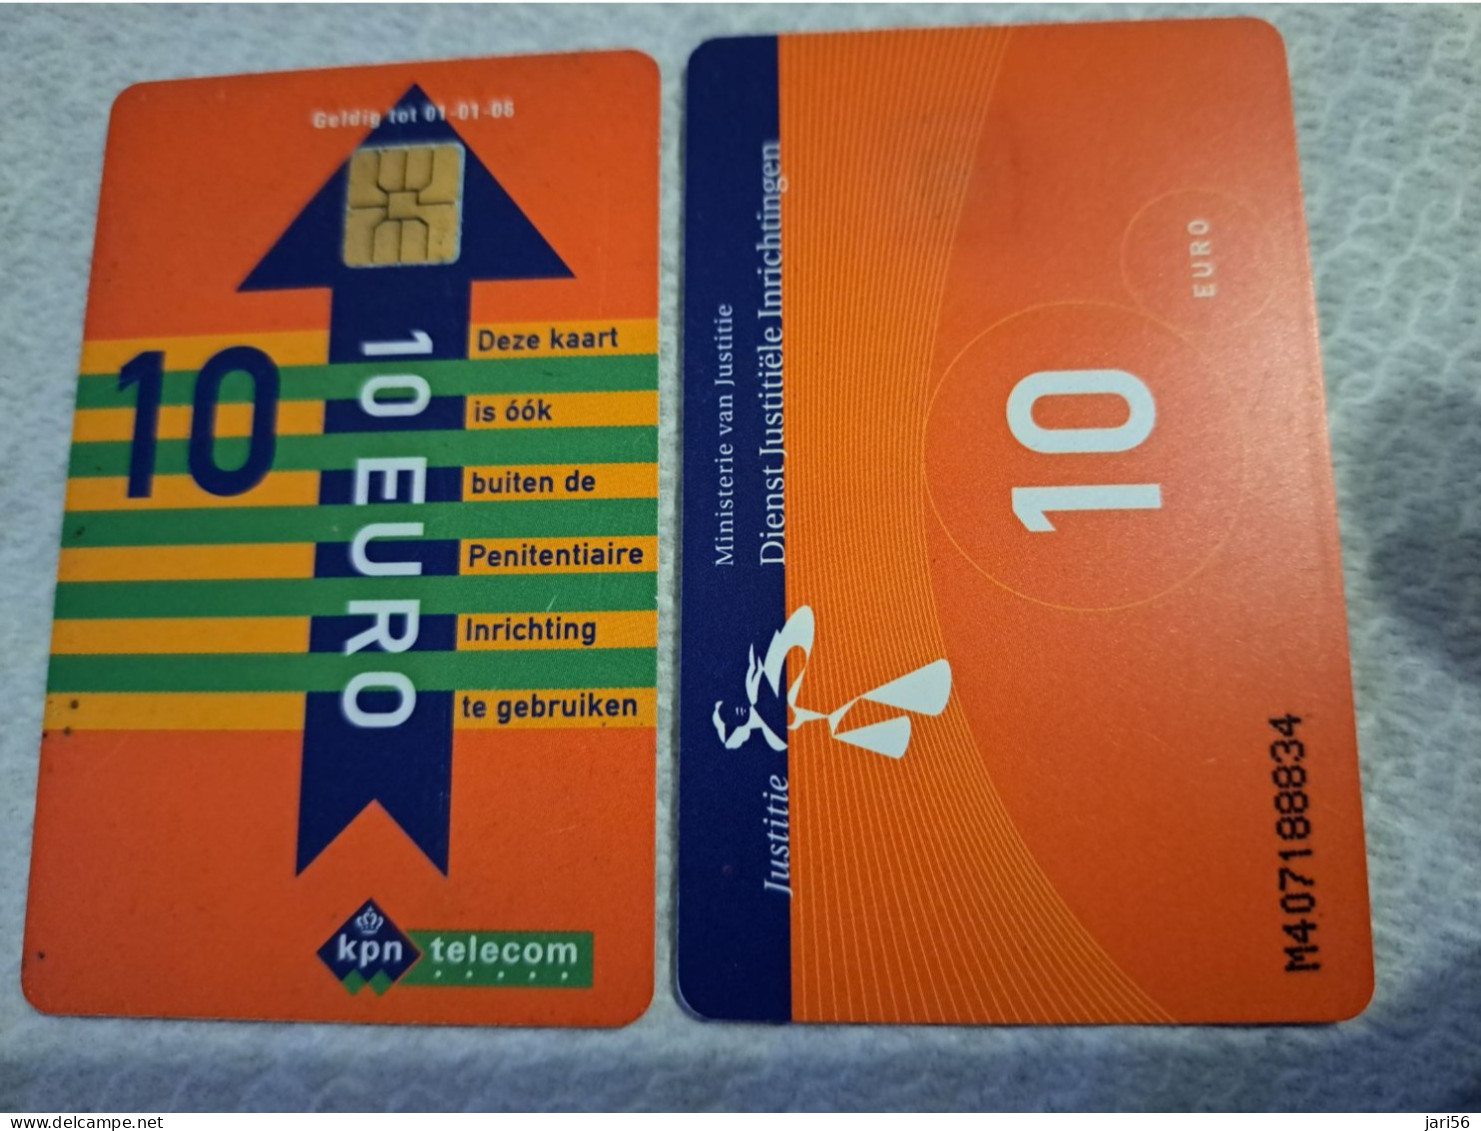 NETHERLANDS   € 10,-   / USED  / DATE  01-01-08  JUSTITIE/PRISON CARD  CHIP CARD/ USED   ** 16161** - [3] Sim Cards, Prepaid & Refills